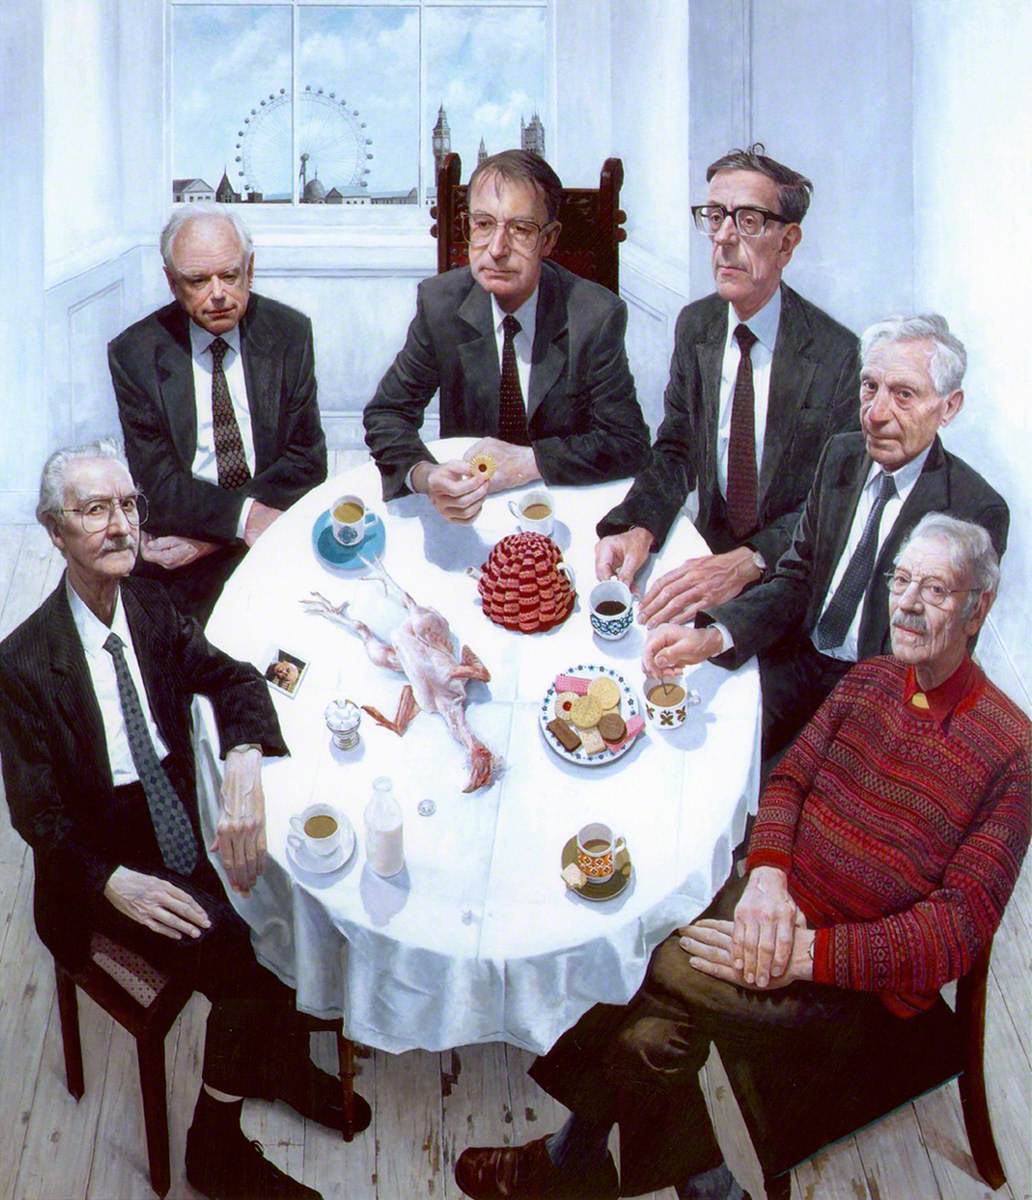 Six Academy Presidents (Gallus Gallus with Still Life and Presidents)